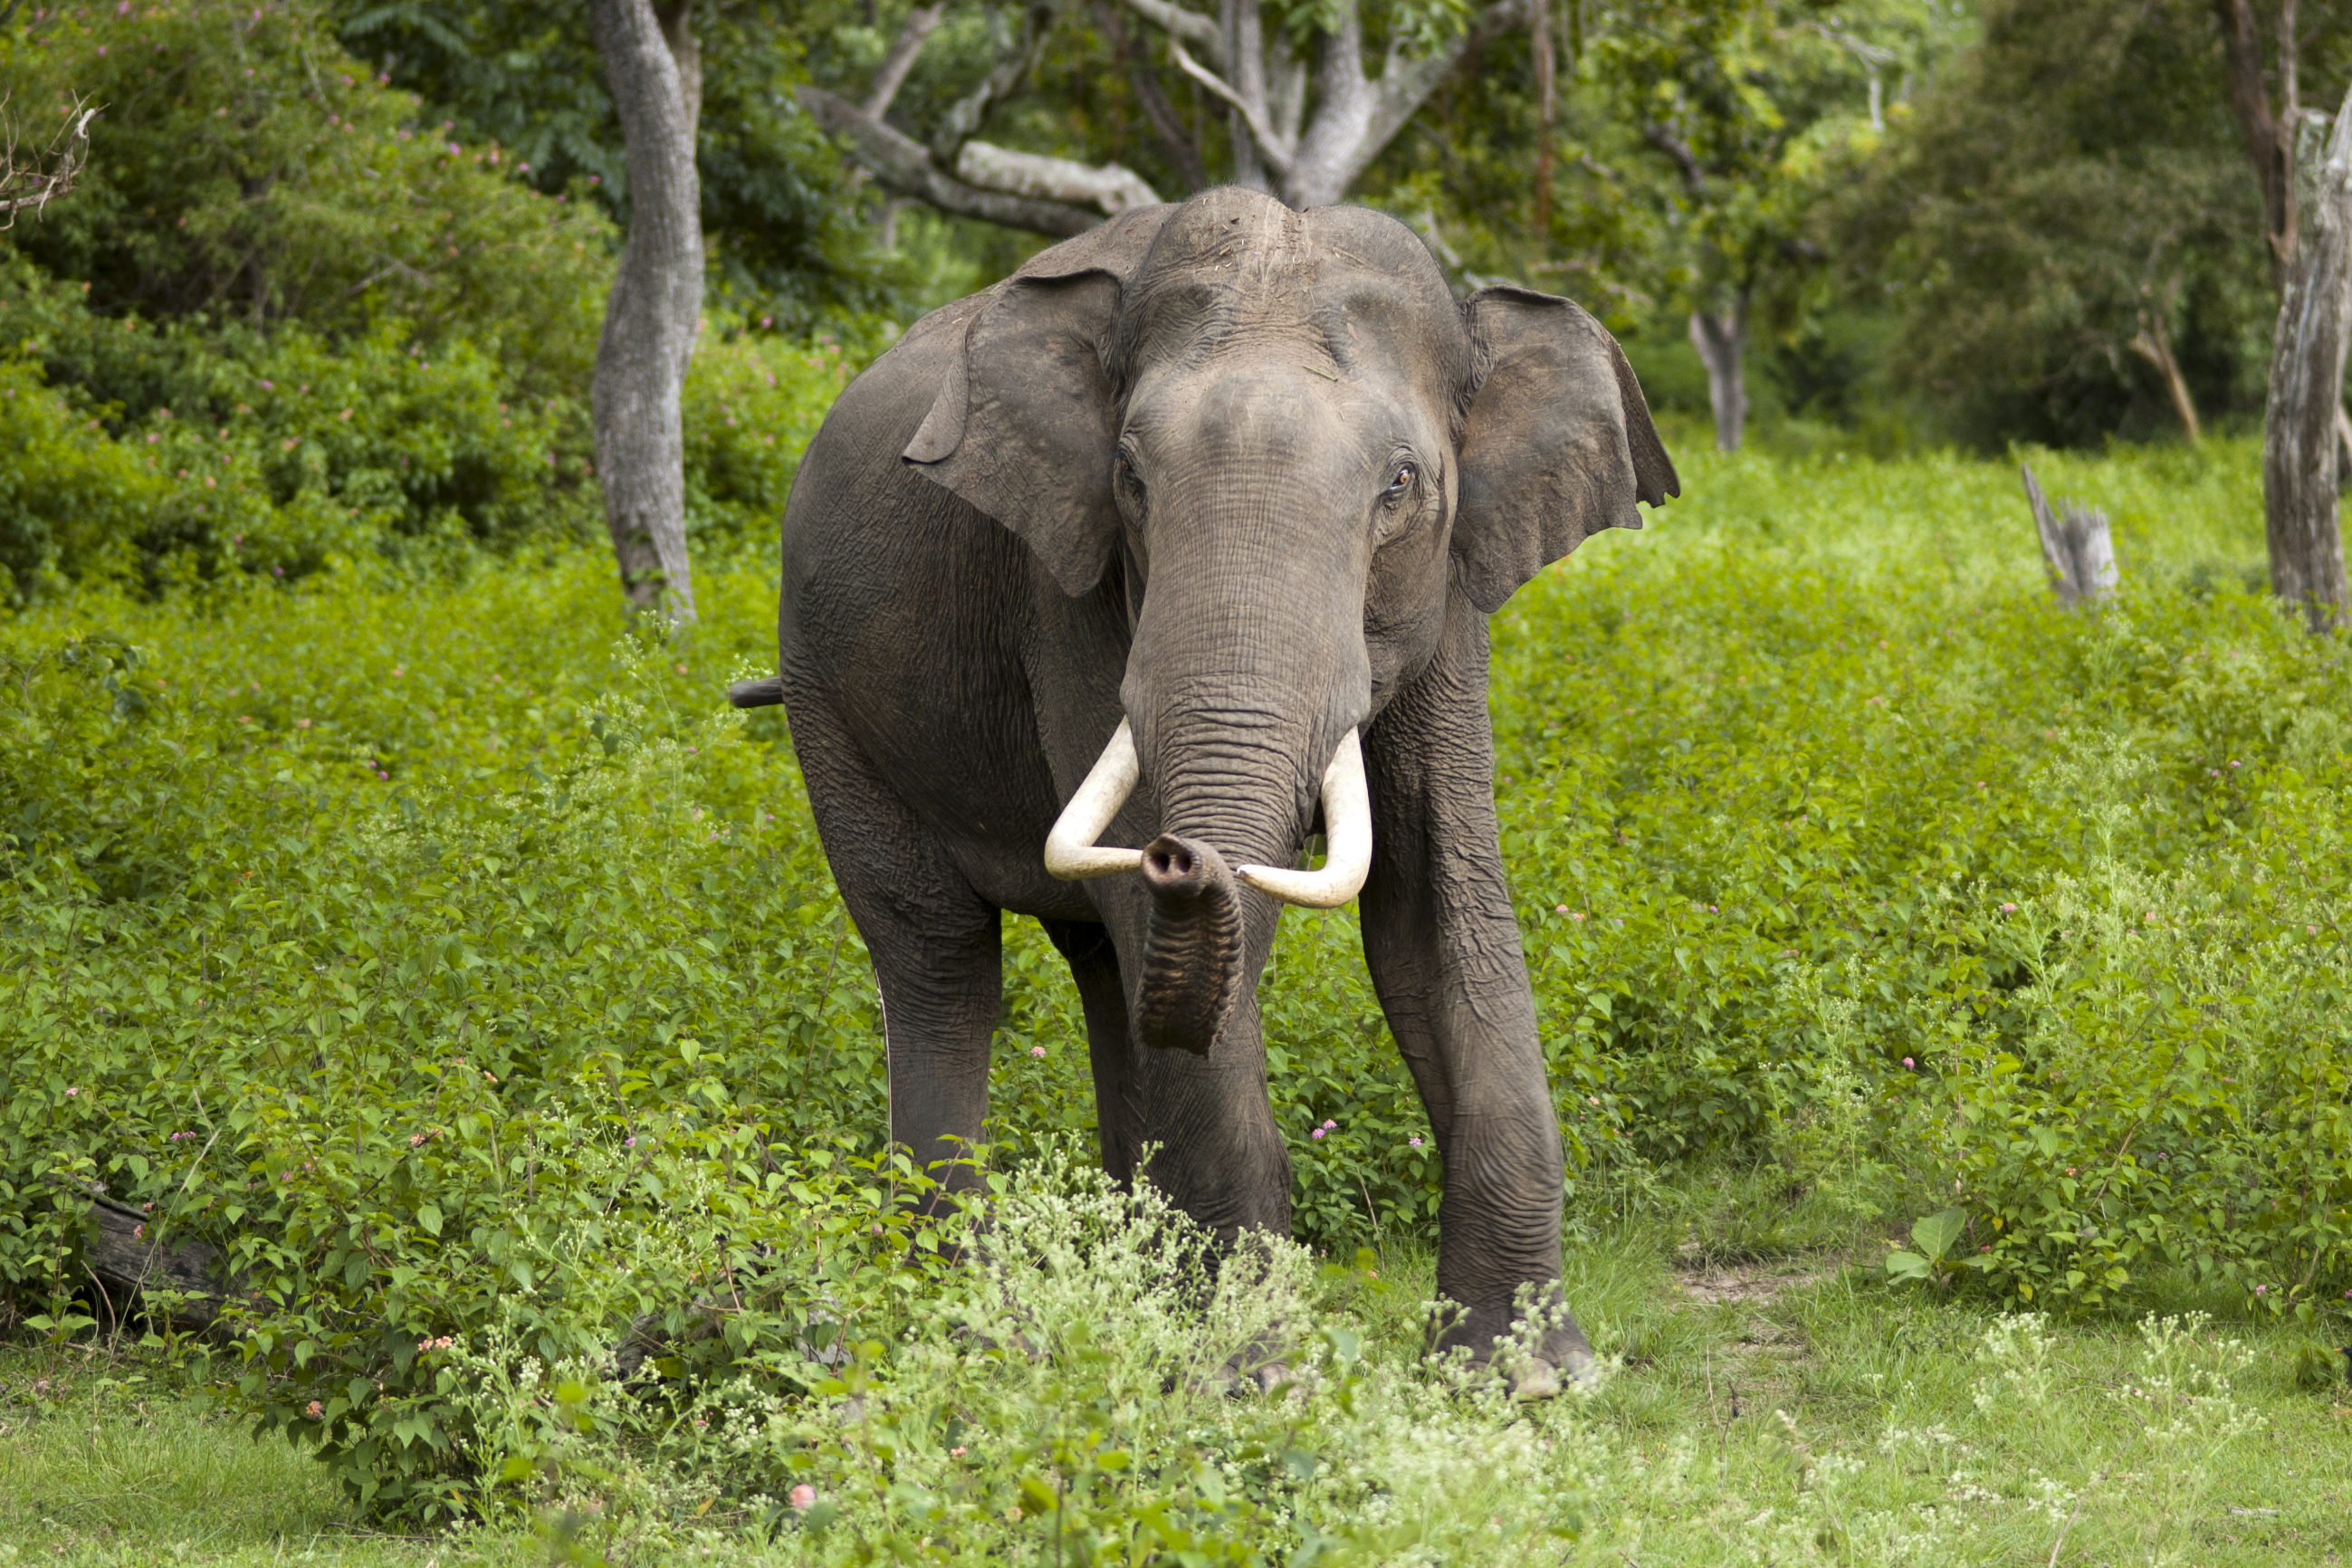 Falling Asian elephant numbers may impact forest biodiversity